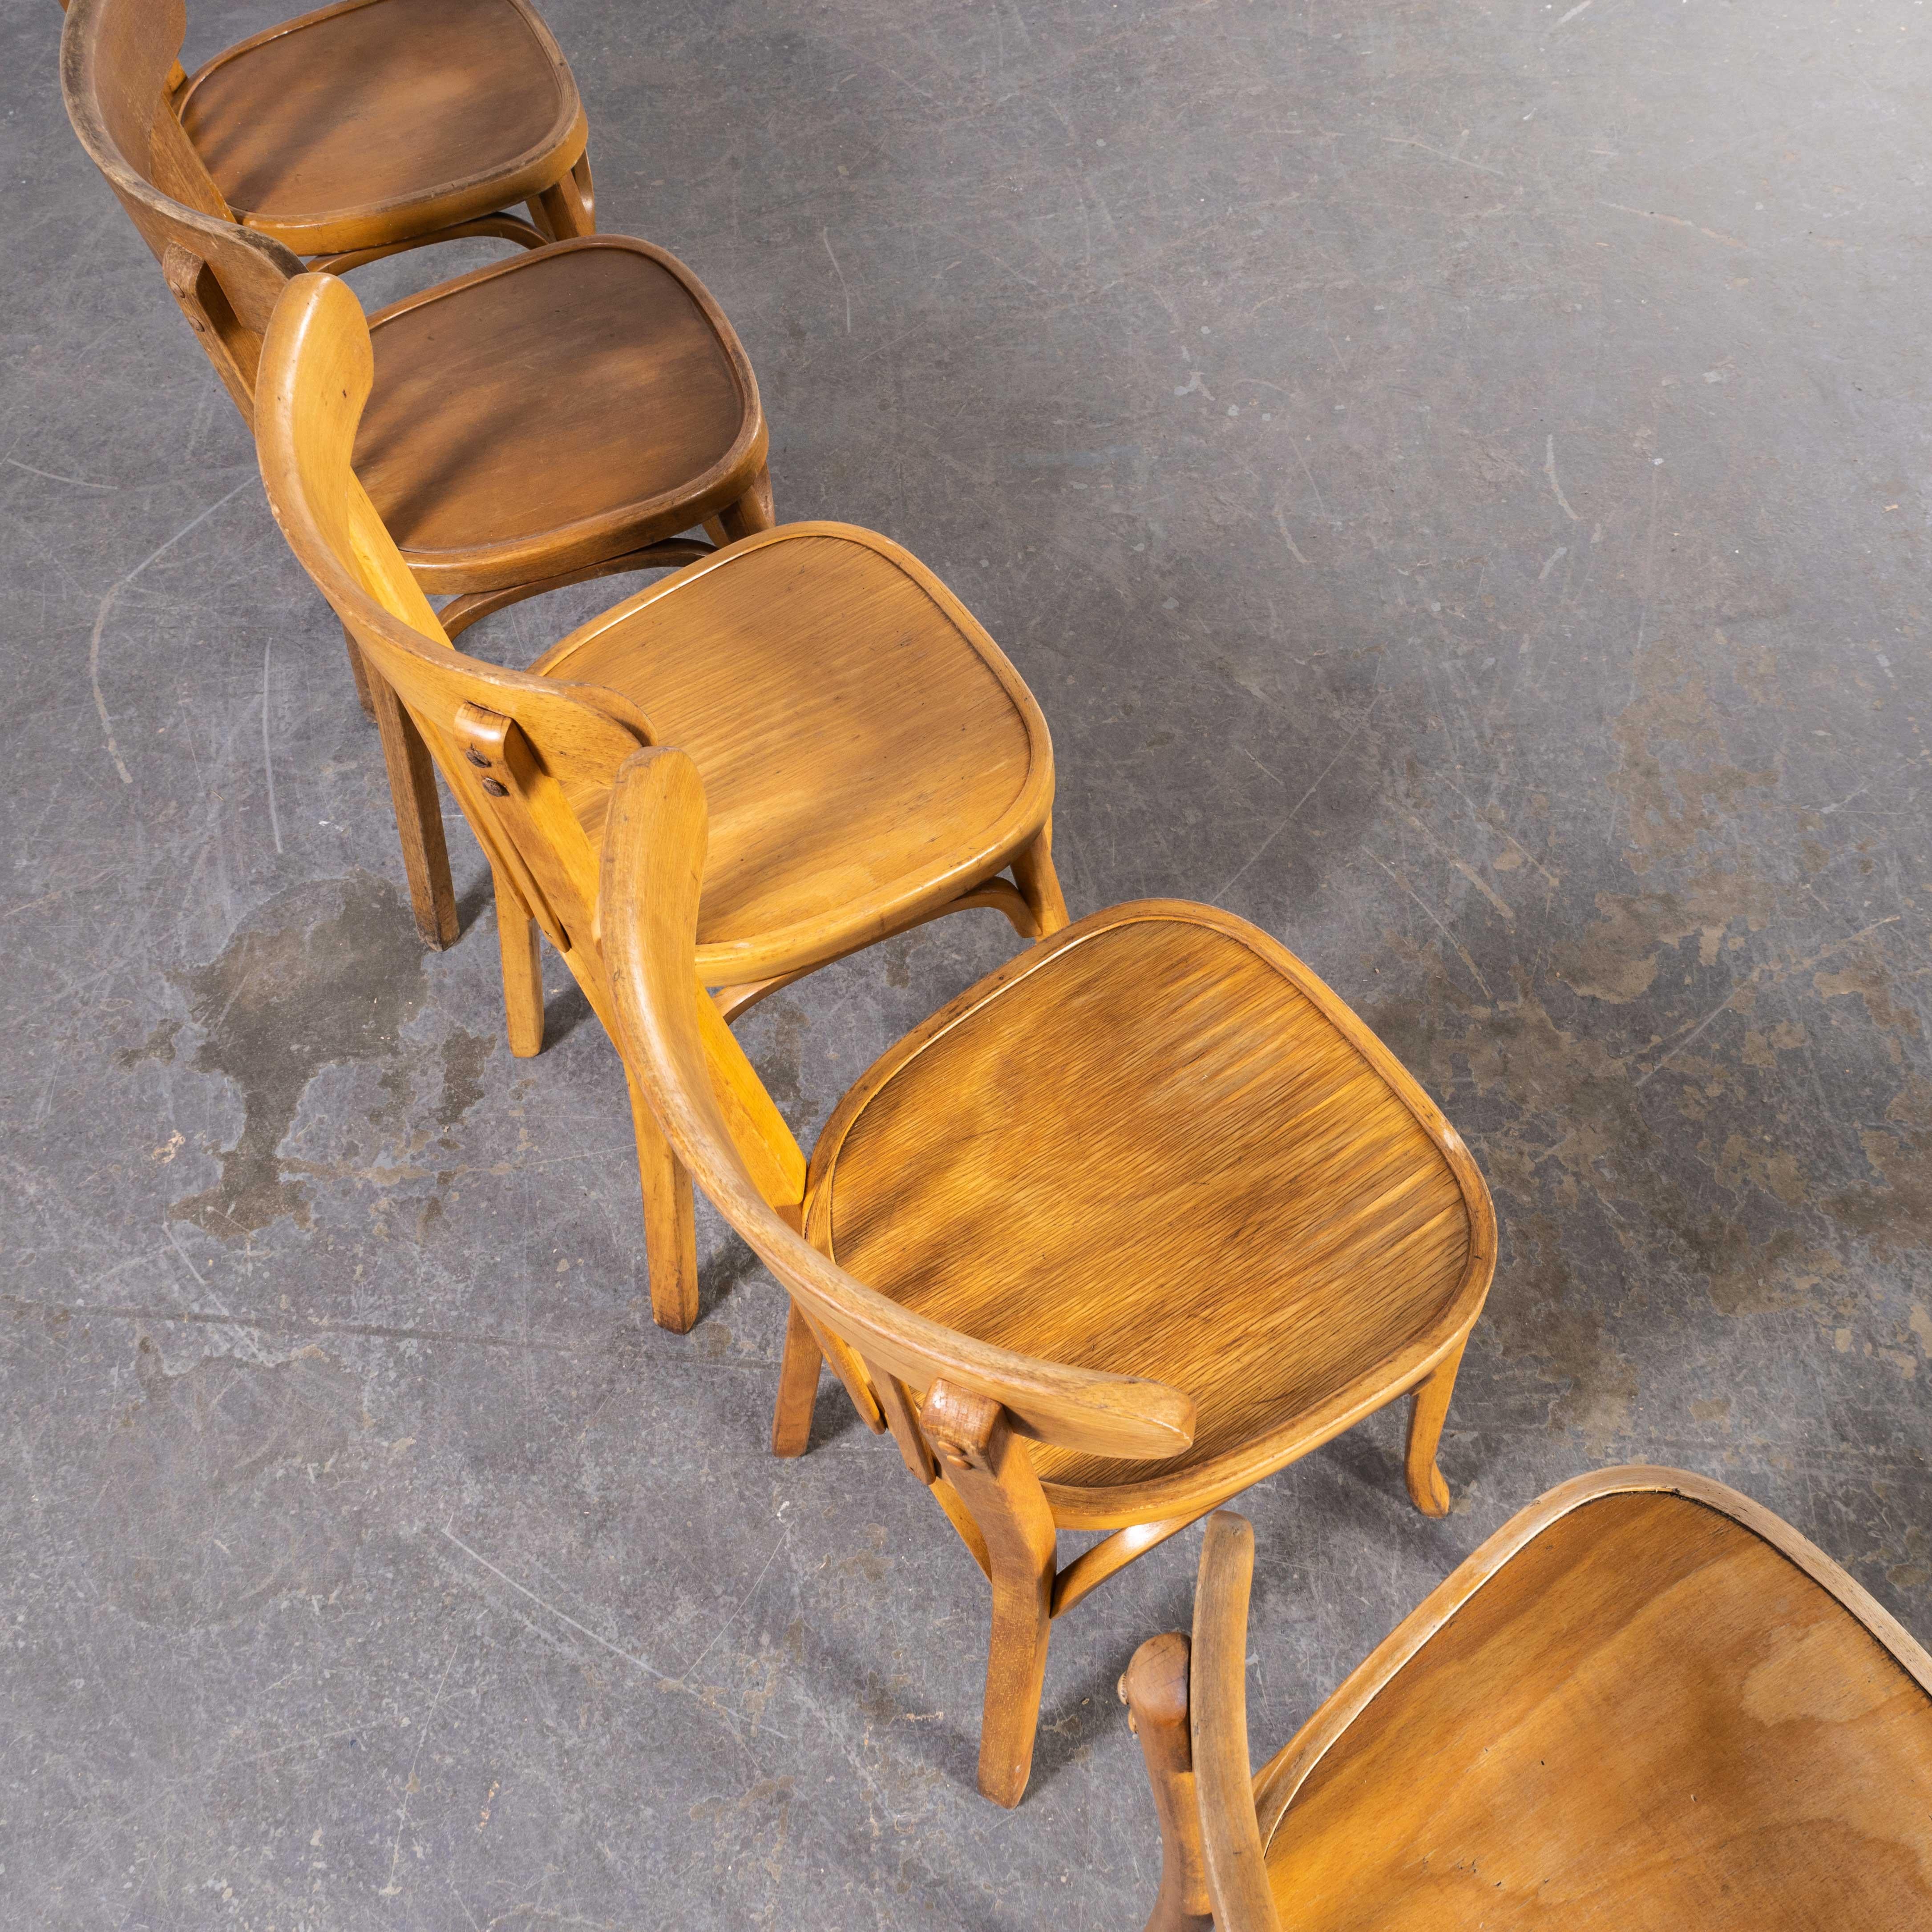 1950s French honey colour dining chairs – harlequin set of five
1950s French honey colour dining chairs – harlequin set of five. Classic beech bistro chair made in France by the maker Baumann. Baumann is a slightly off the radar French producer